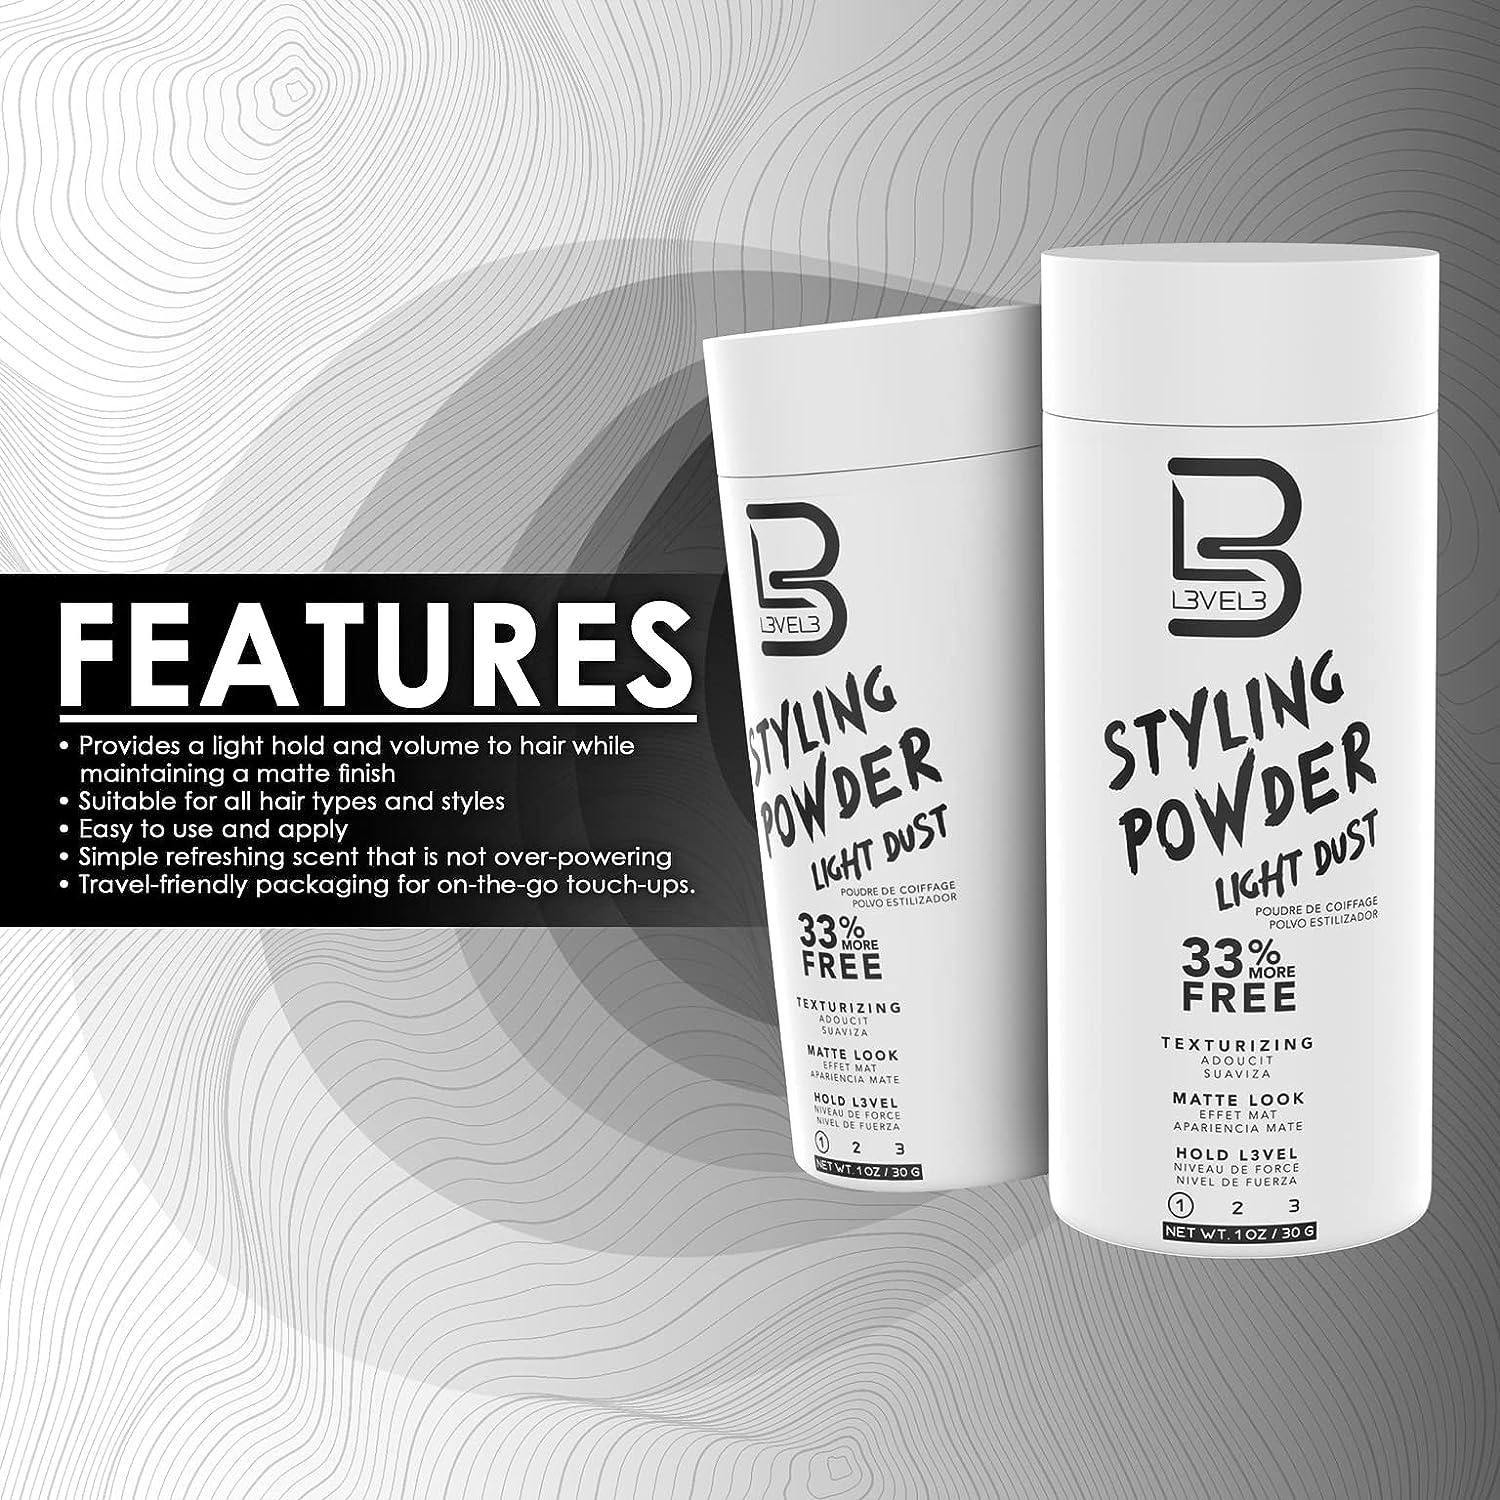 L3 Level 3 Styling Powder - Natural Look Mens Powder - Easy to Apply with  No Oil or Greasy Residue (Large - 60 Grams) - Yahoo Shopping